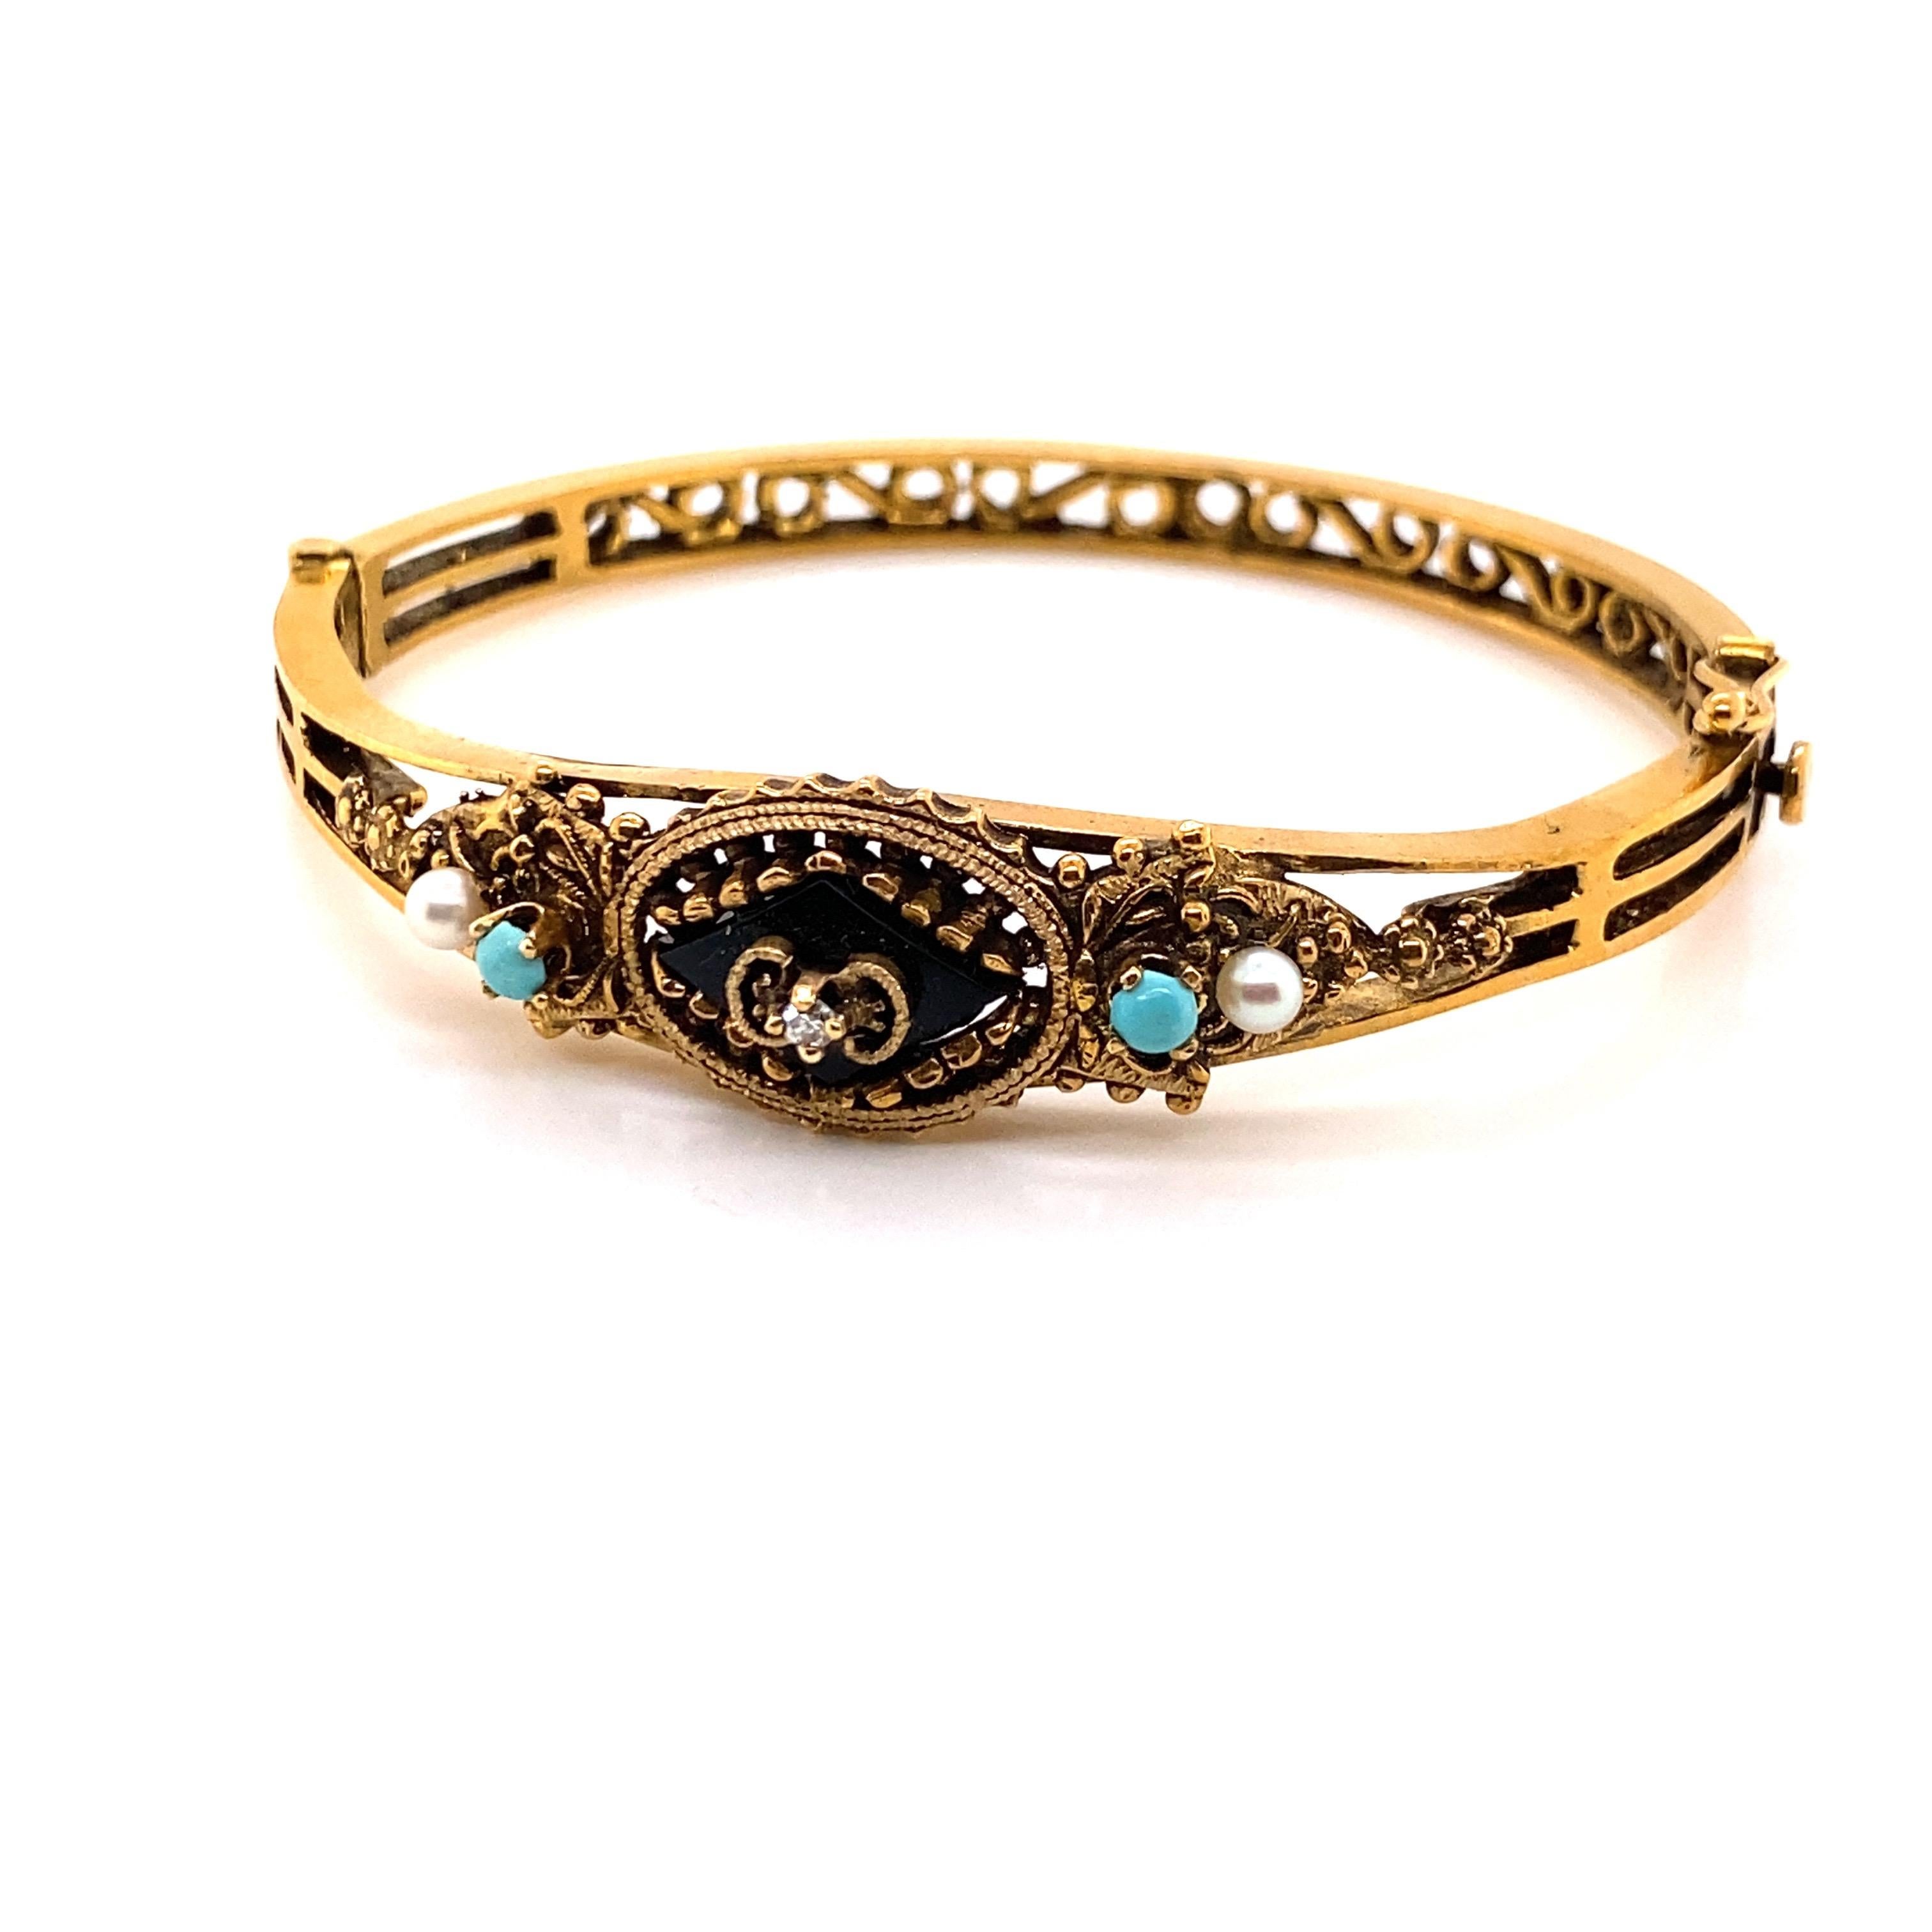 Vintage Victorian Reproduction Bangle Bracelet with Onyx, Turquoise and Pearl - The width of the bangle on top is 14mm and tapers down to 5mm on the bottom. The inside diameter is 1.9 inches high and 2.25 inches wide. There is a 2mm single cut